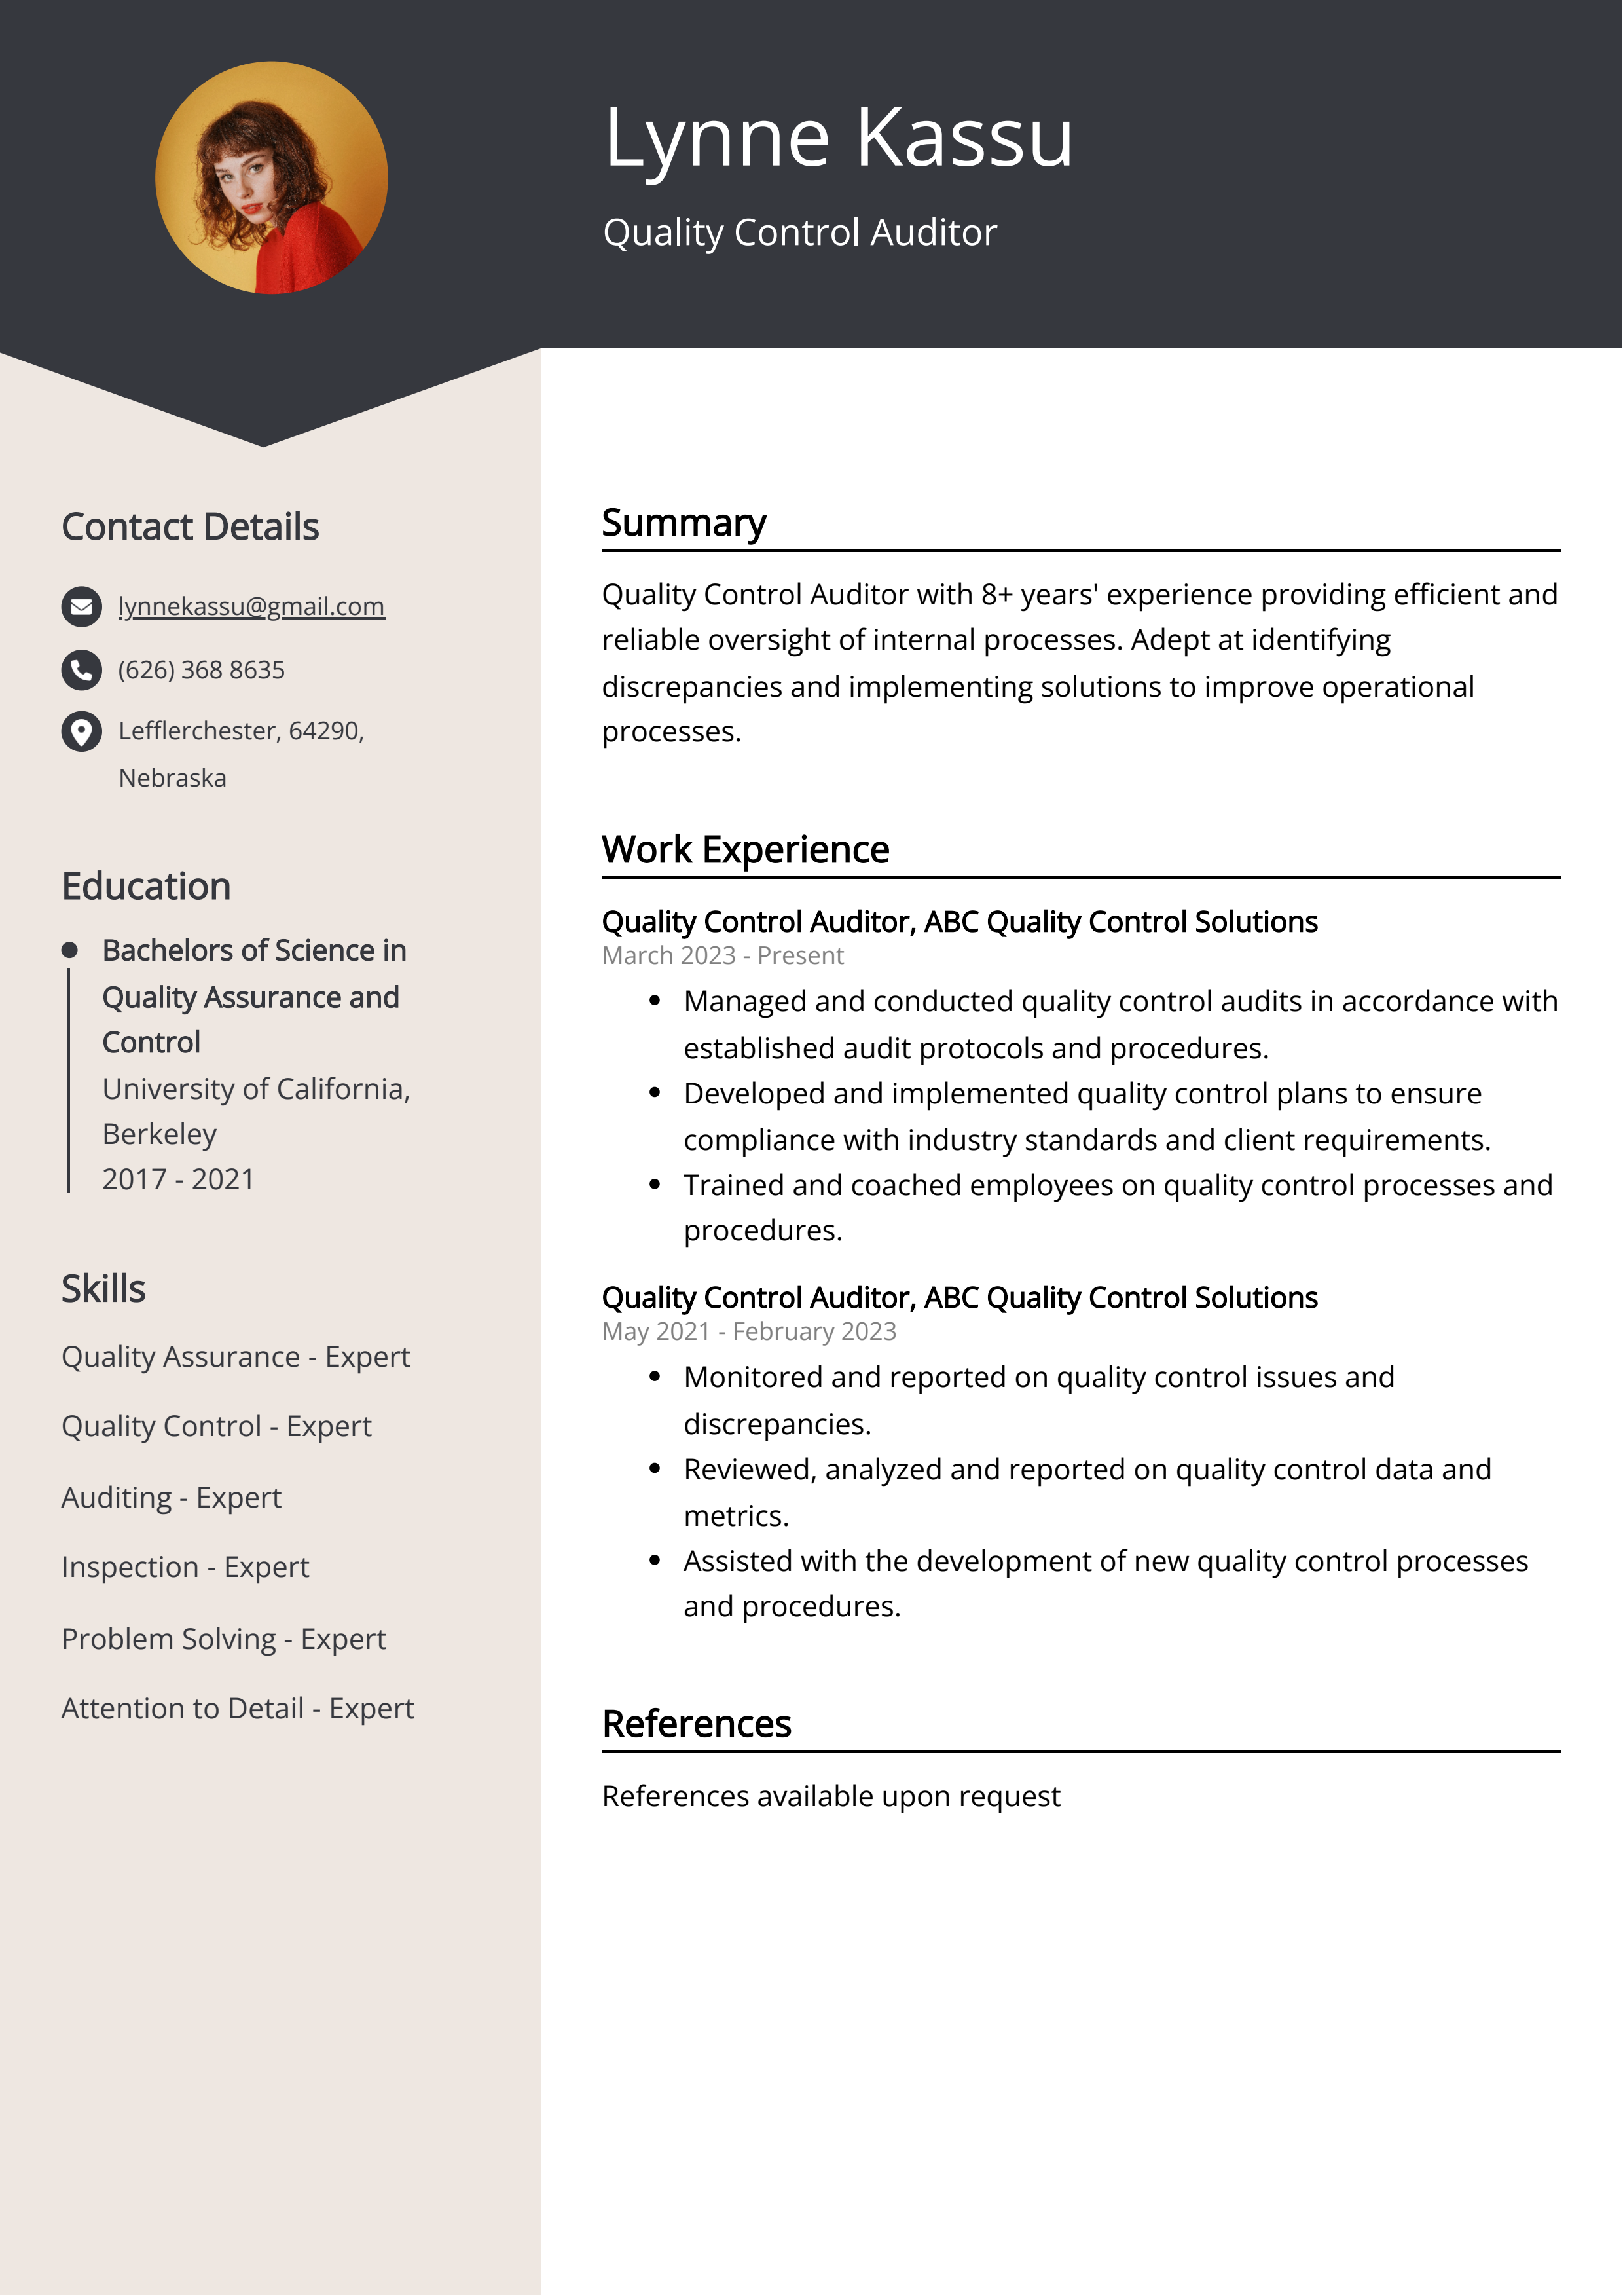 Quality Control Auditor Resume Example